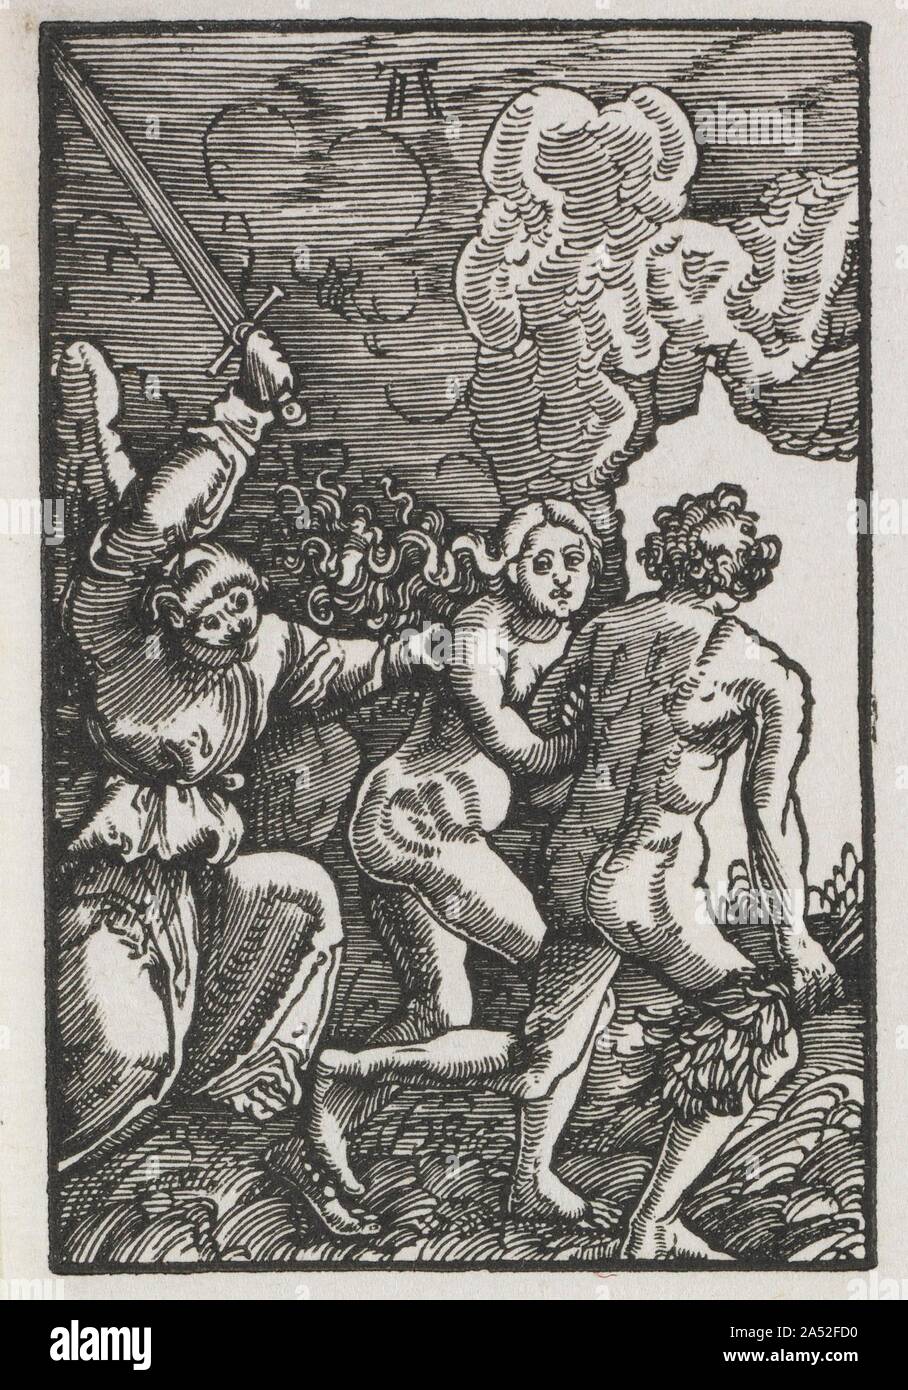 The Fall and Redemption of Man: The Expulsion from Eden, c. 1515. These eight woodcuts come from a series of forty which illustrate the story of Christian redemption from original sin to the Last Judgement. Probably to maximize printing efficiency and quality, eight woodblocks were printed on each of five sheets of paper, but the subjects are not in the correct chronological order. Prior to sale, the sheets were cut into eight pieces. The sheets in the museum's set were only cut in half, preserving four prints per page. The numbers after the titles of the individual images indicate each scene' Stock Photo